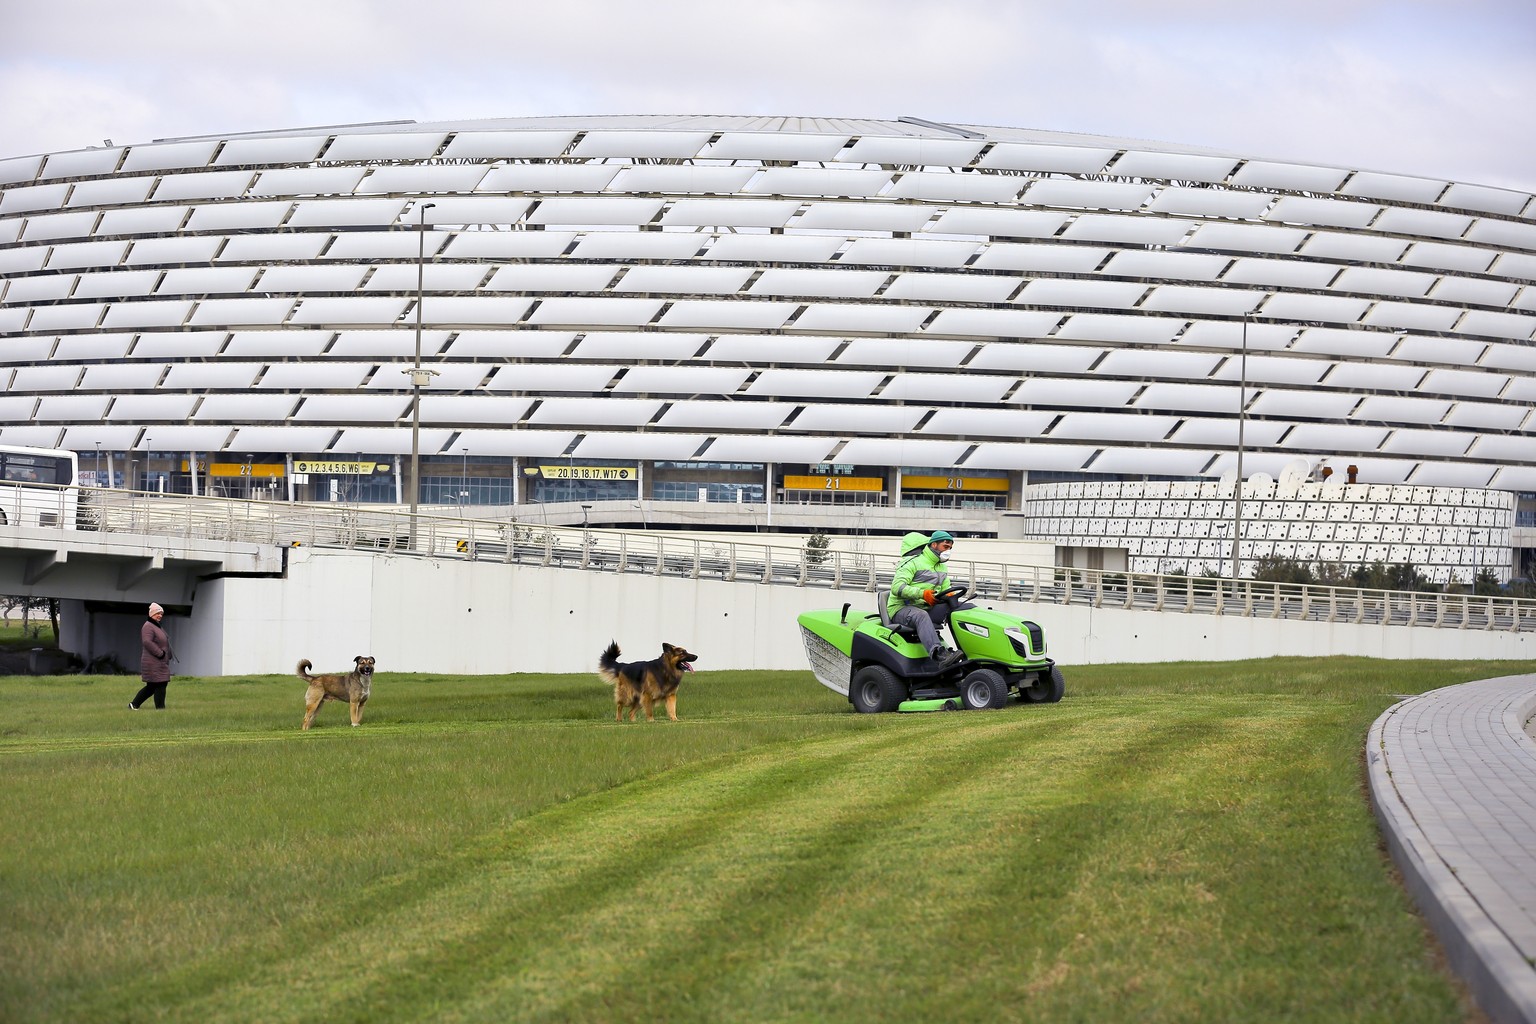 A worker rides a tractor as he mows a lawn in front of the Olympic stadium, where UEFA planned to host four UEFA Euro 2020 matches, including a quarterfinal, in Baku, Azerbaijan, Wednesday, March 18,  ...